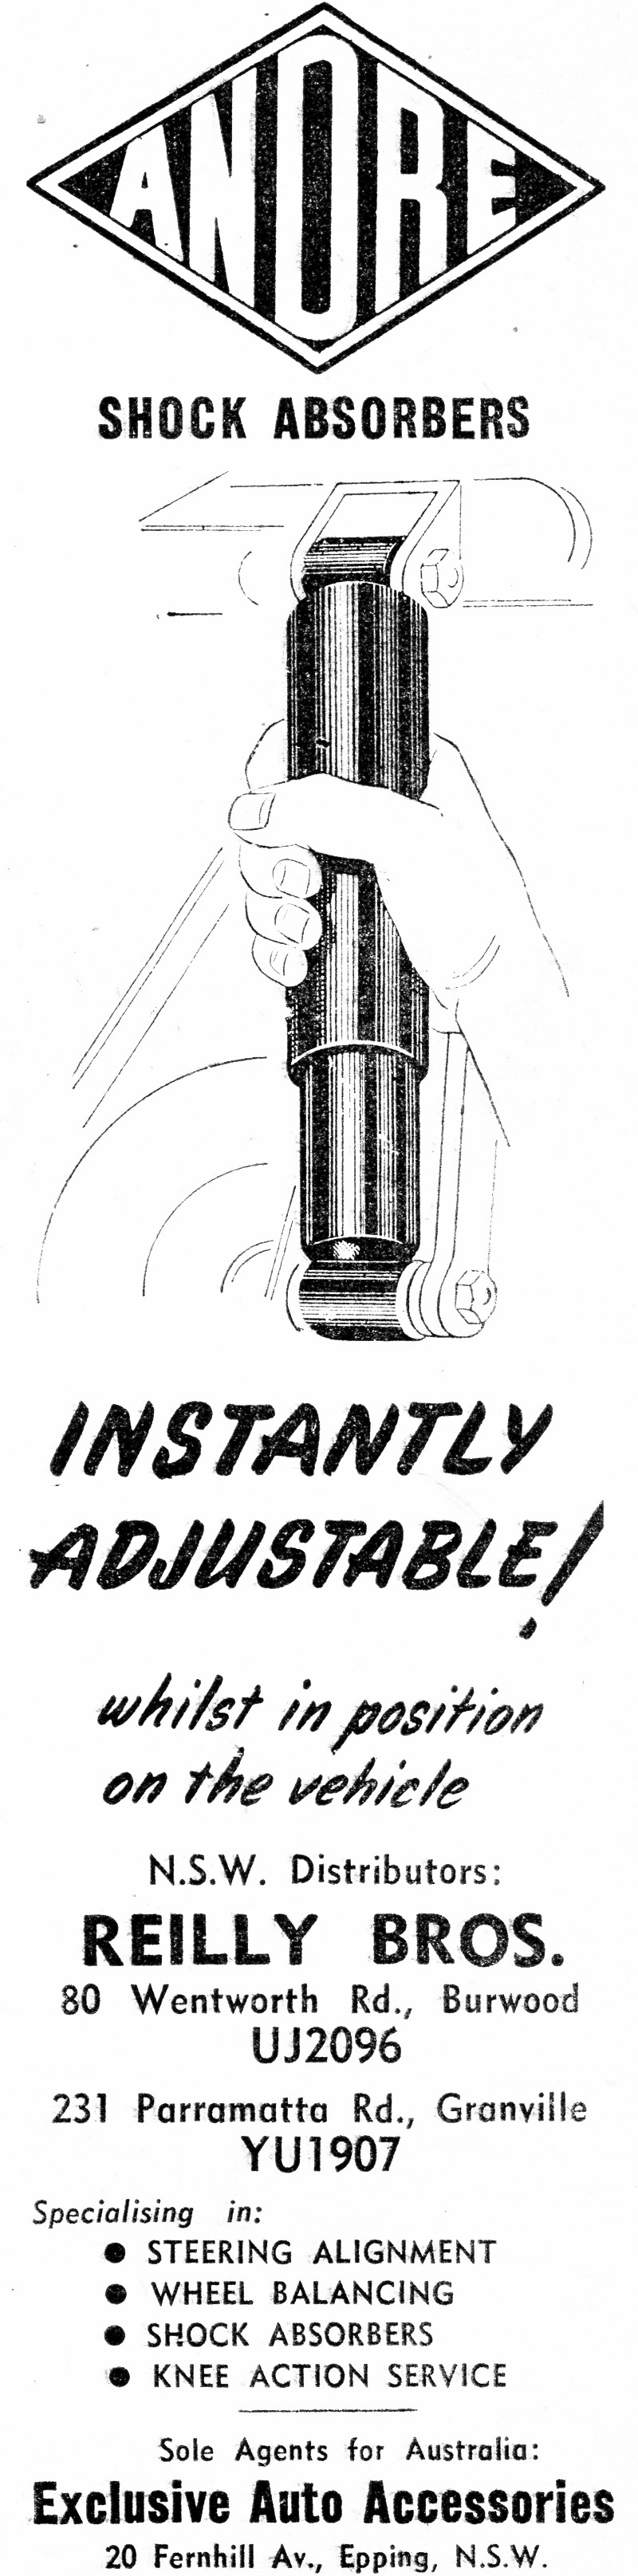 1954 Andre Shock Absorbers